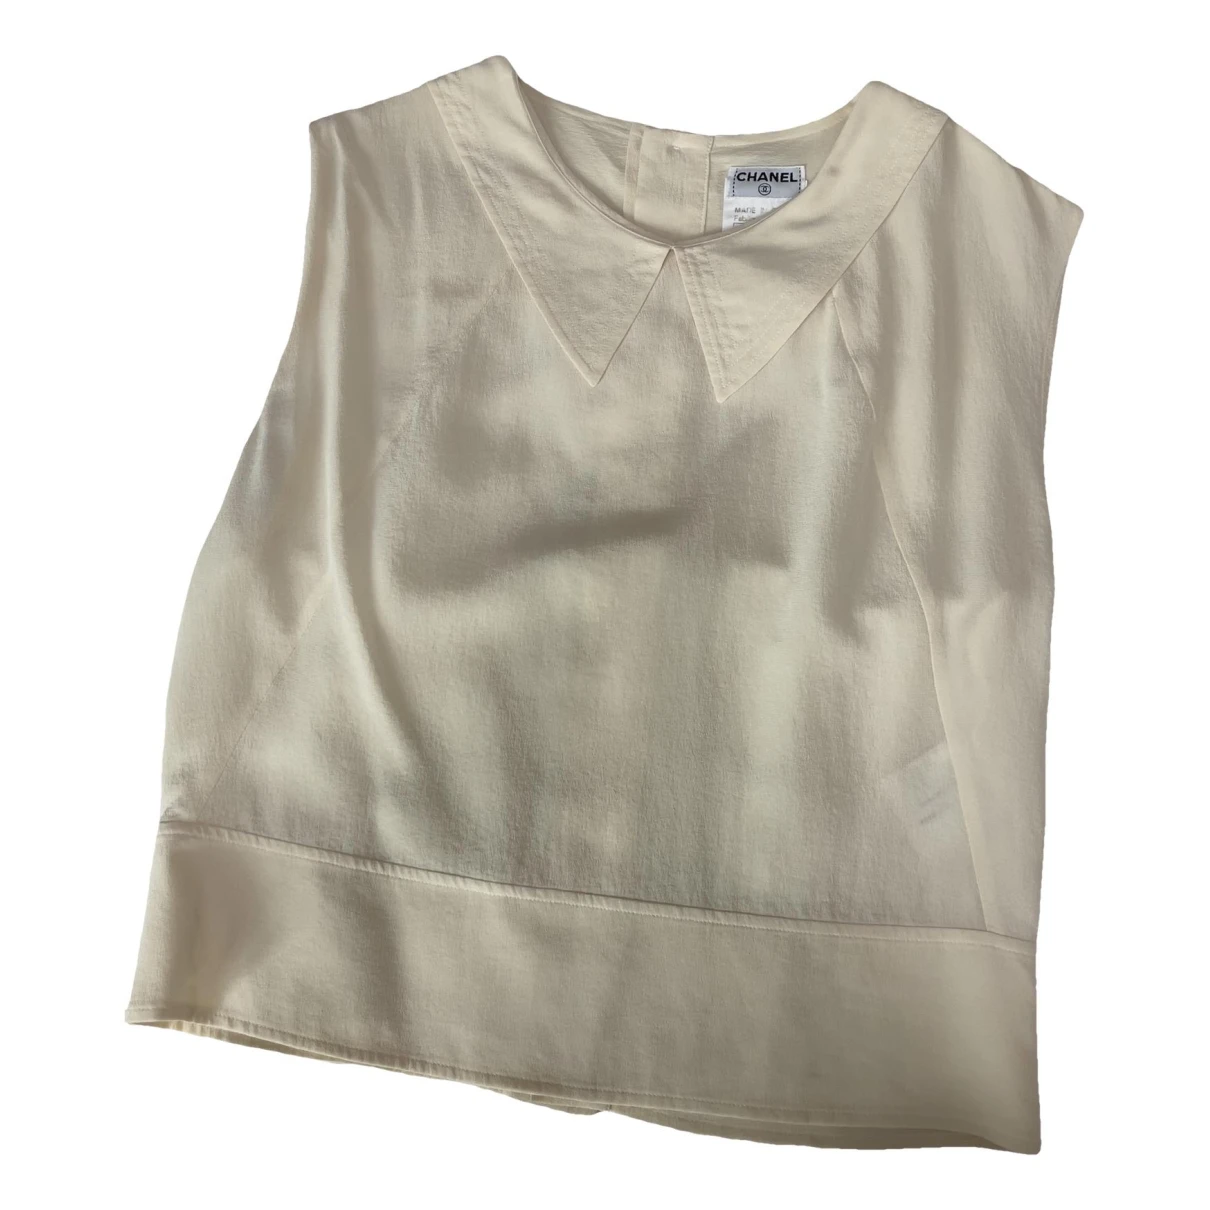 clothing Chanel tops for Female Silk 40 FR. Used condition